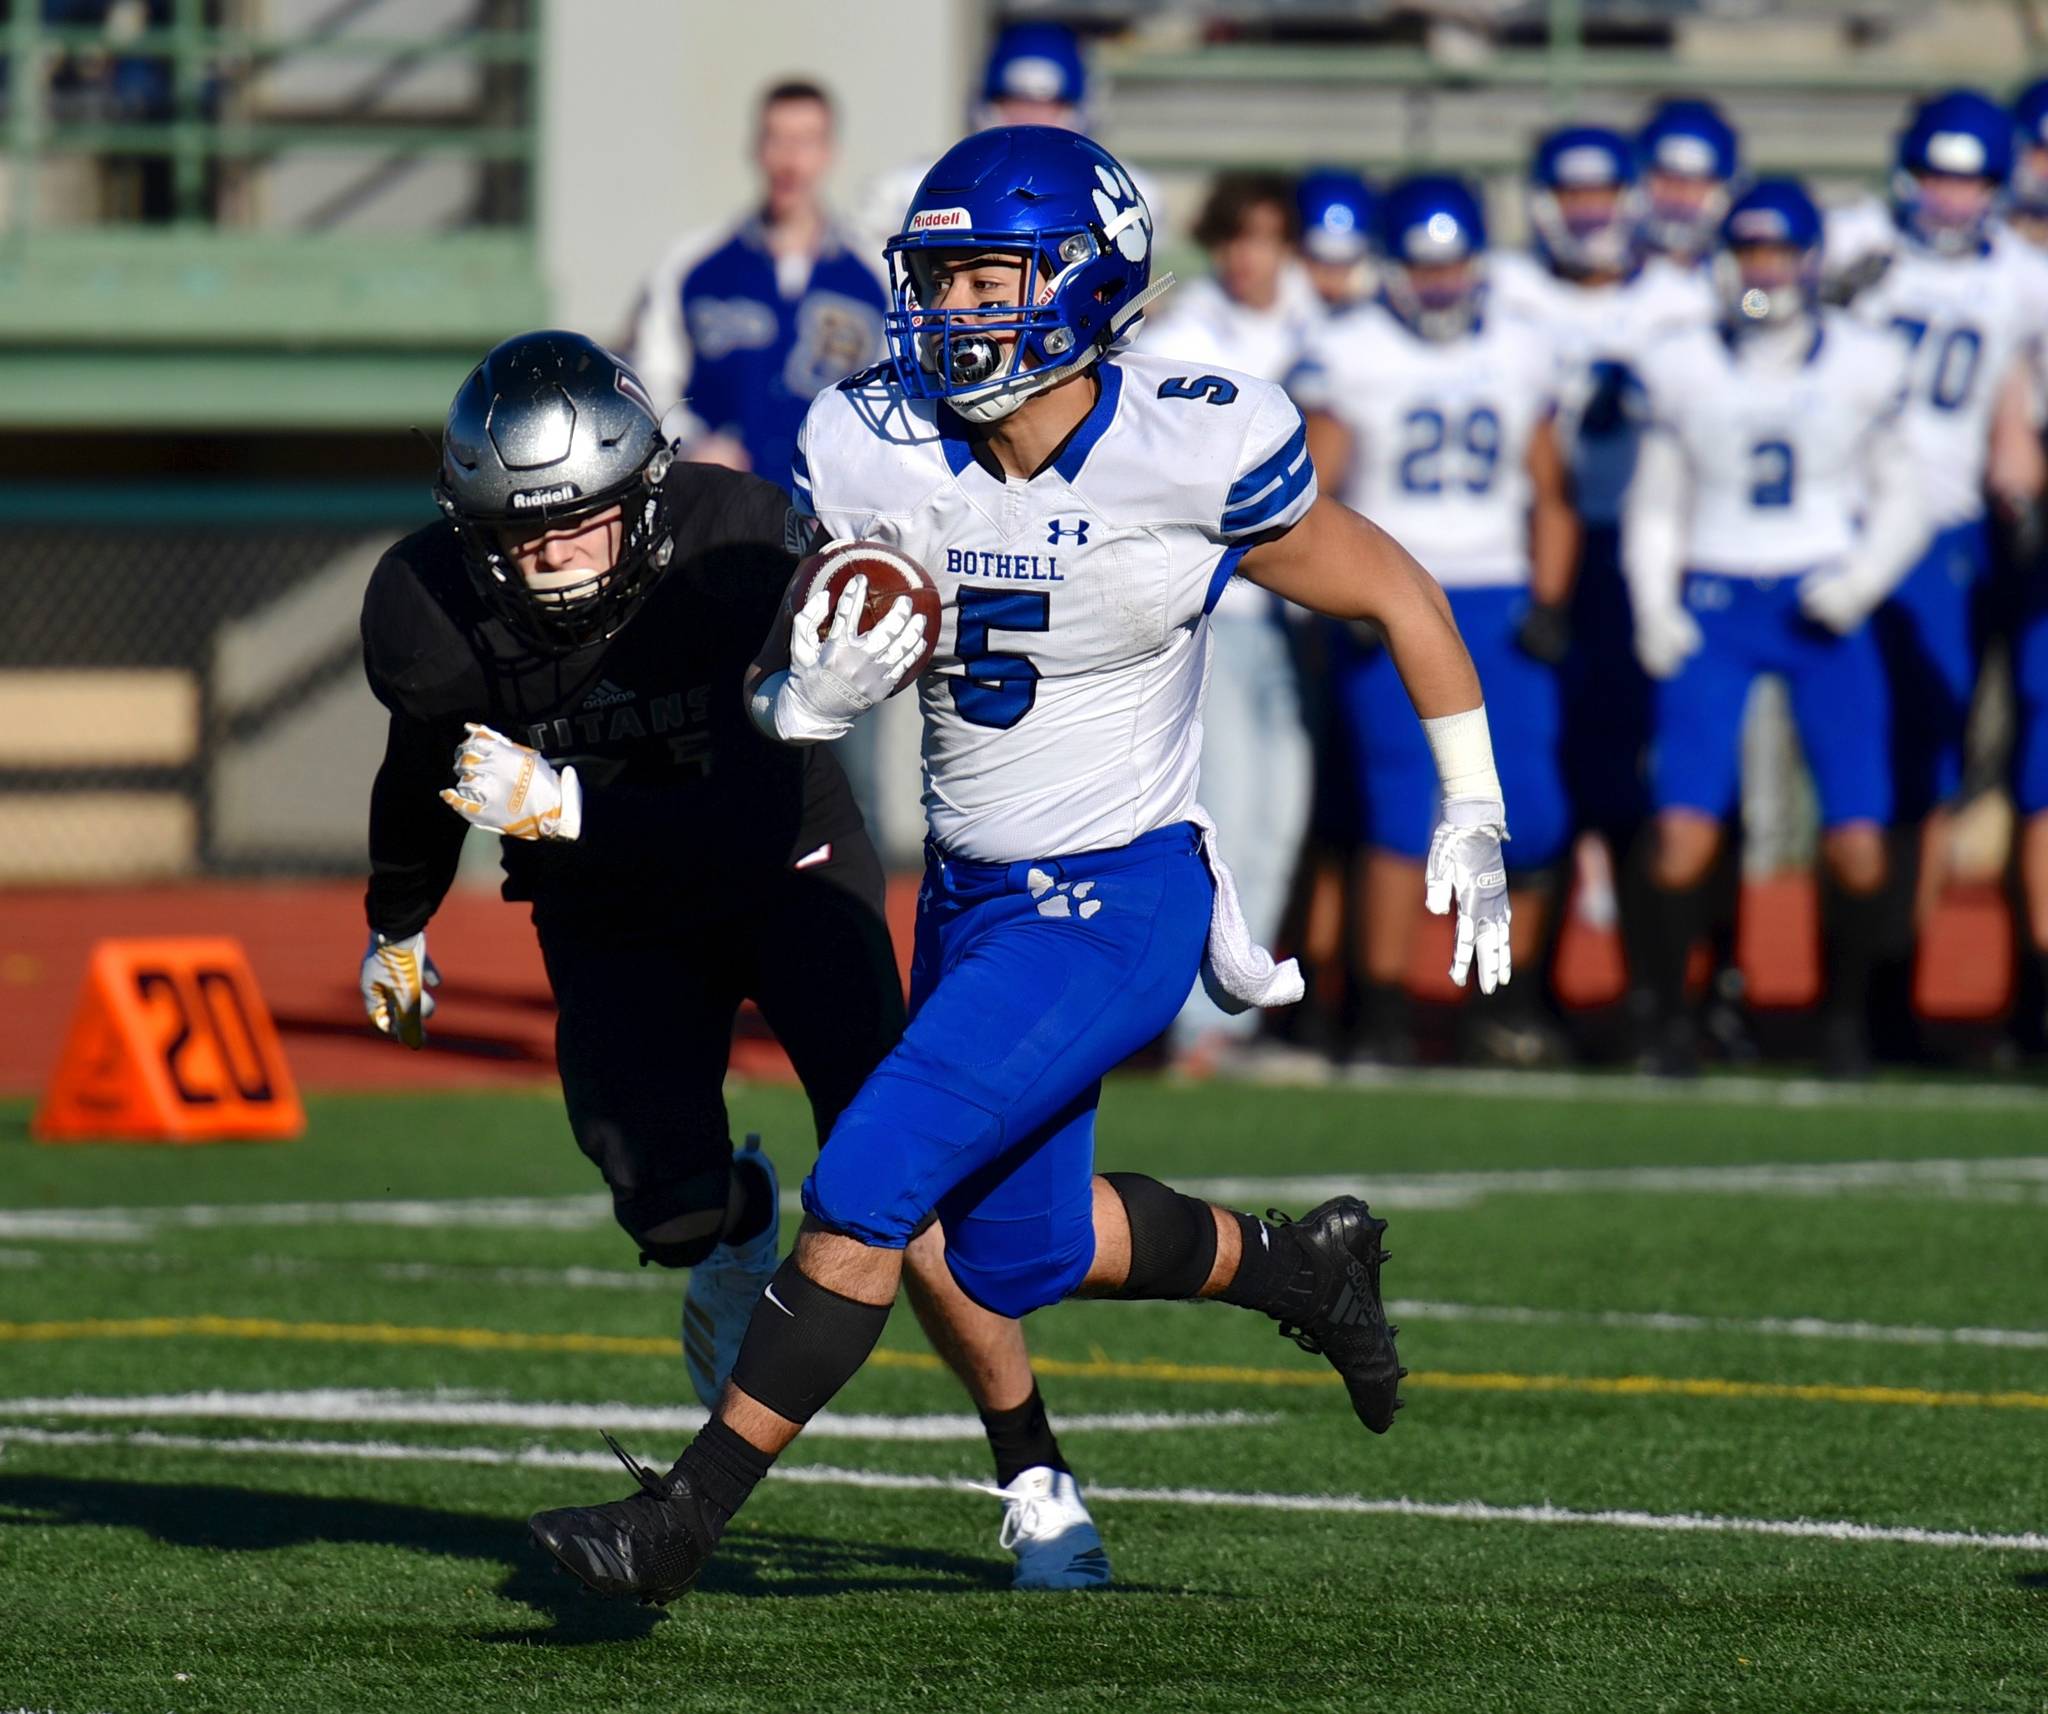 Union defeats Bothell in high-scoring contest